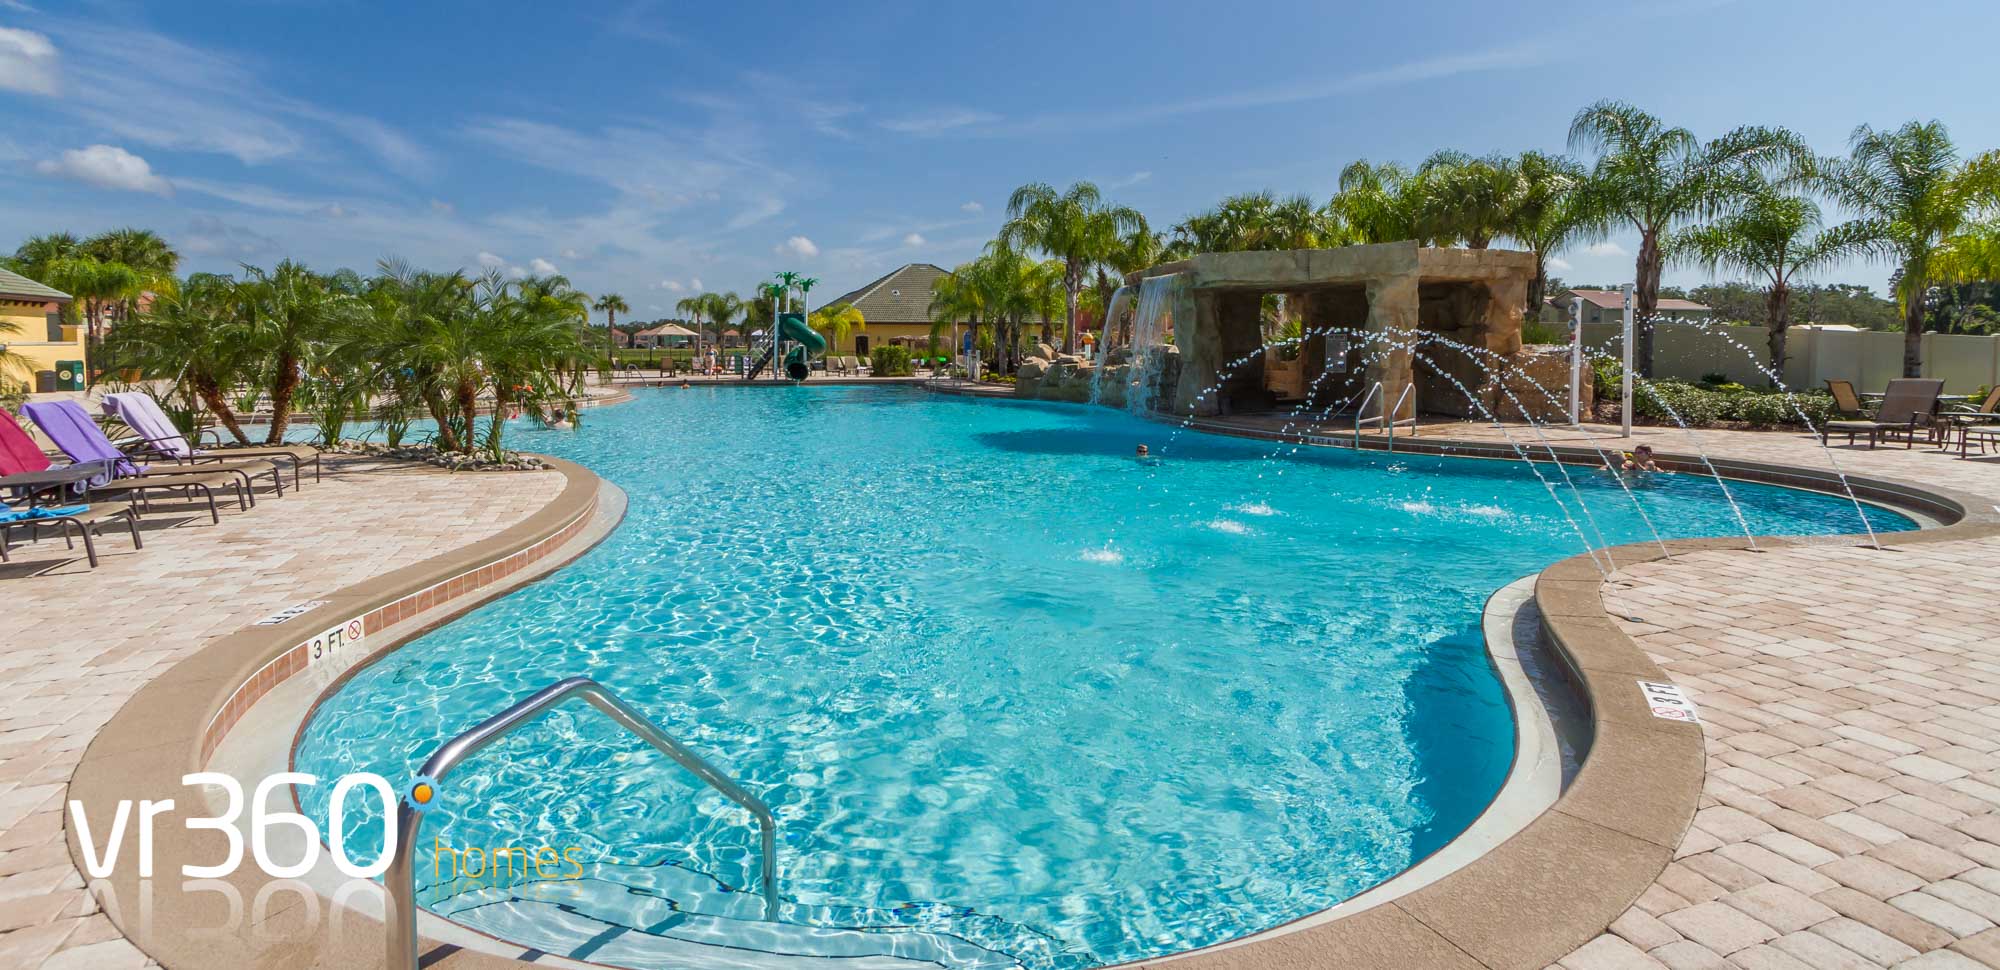 Paradise Palms Resort Additional Amenities Reopening Announcement